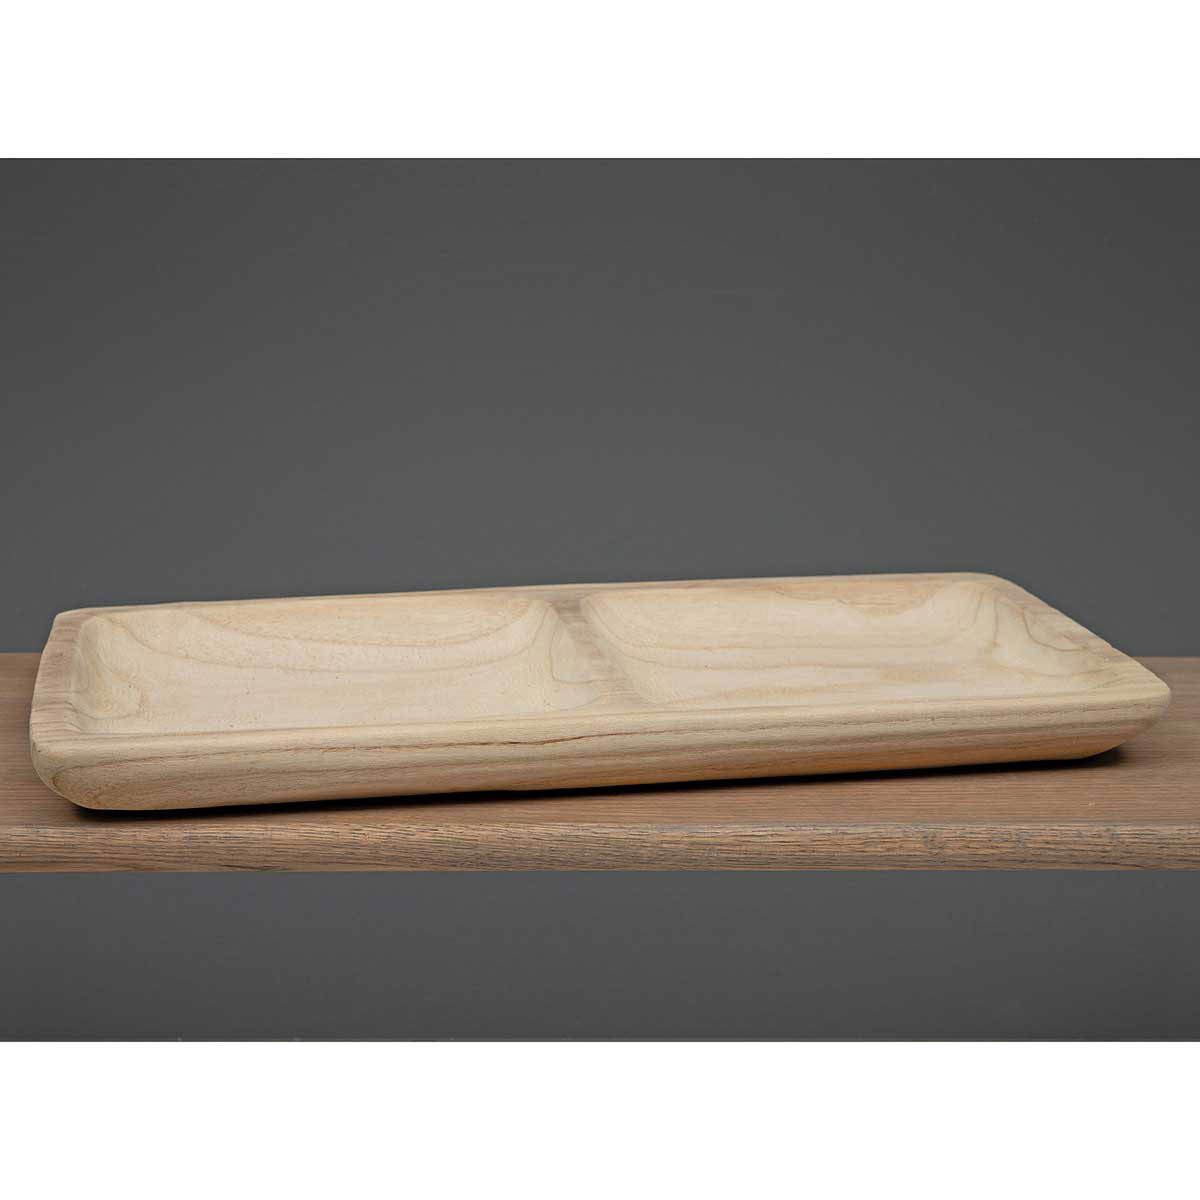 WOOD DOUBLE TRAY NATURAL 22.75"X10.75"X1.75" - Click Image to Close